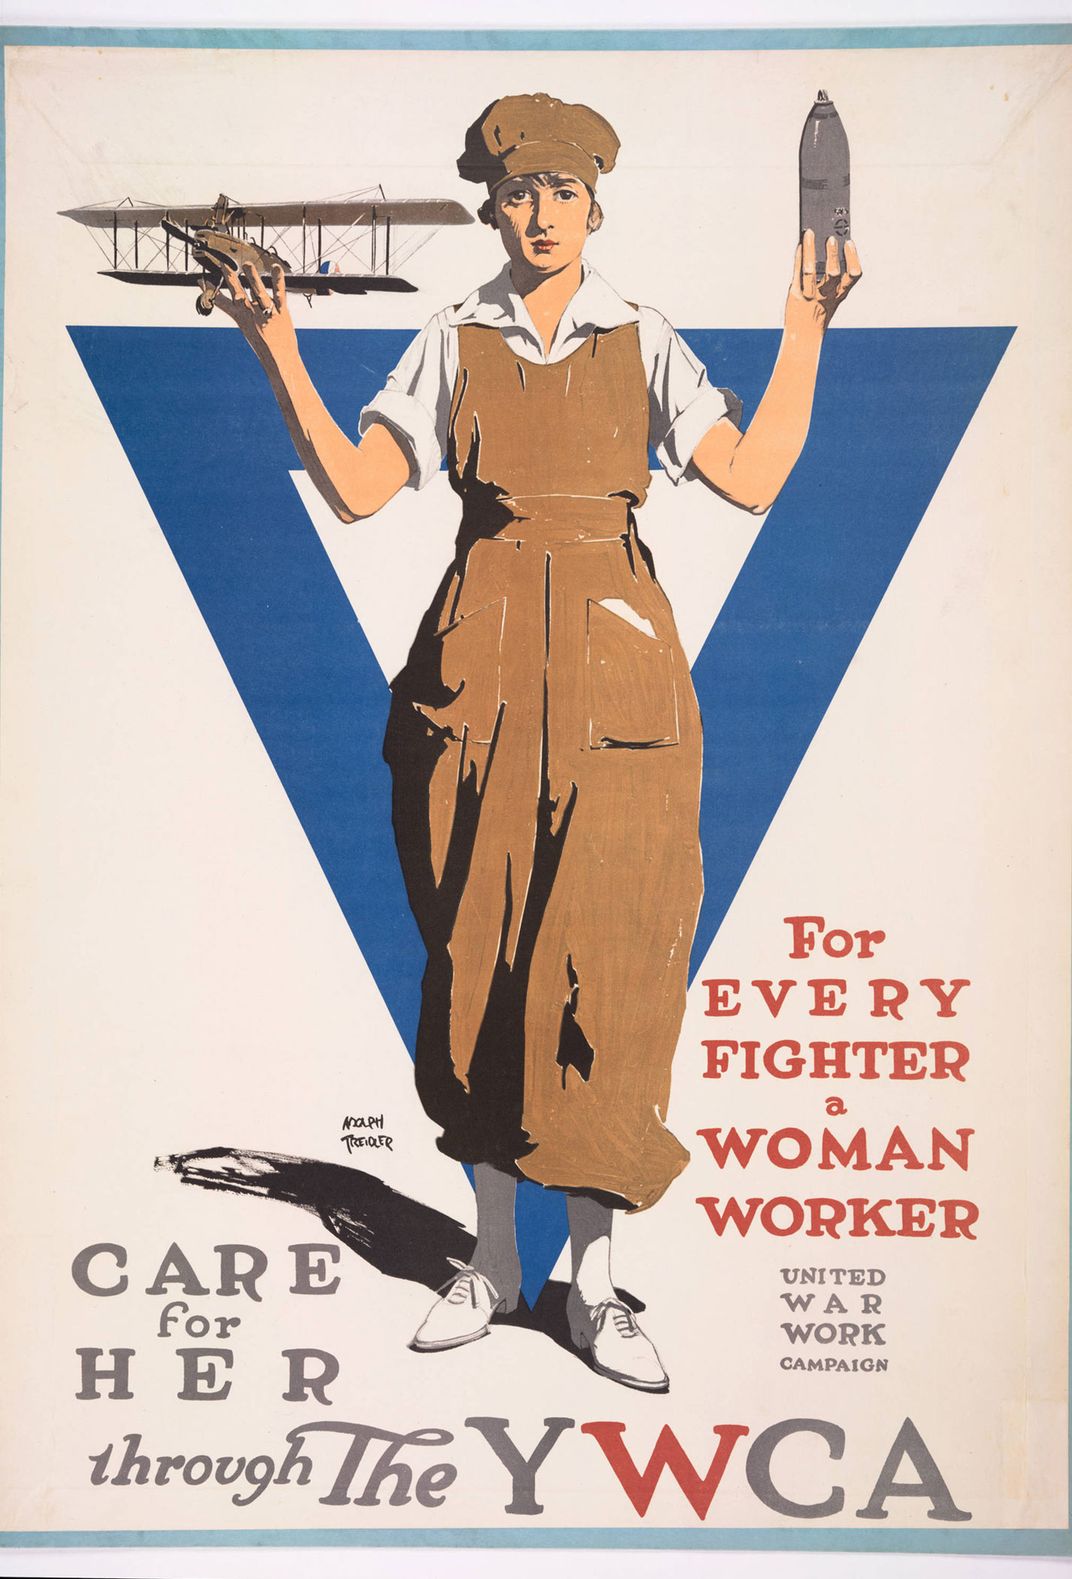 Adolph Treidler, For Every Fighter a Woman Worker: Care for Her Through the YWCA, circa 1918